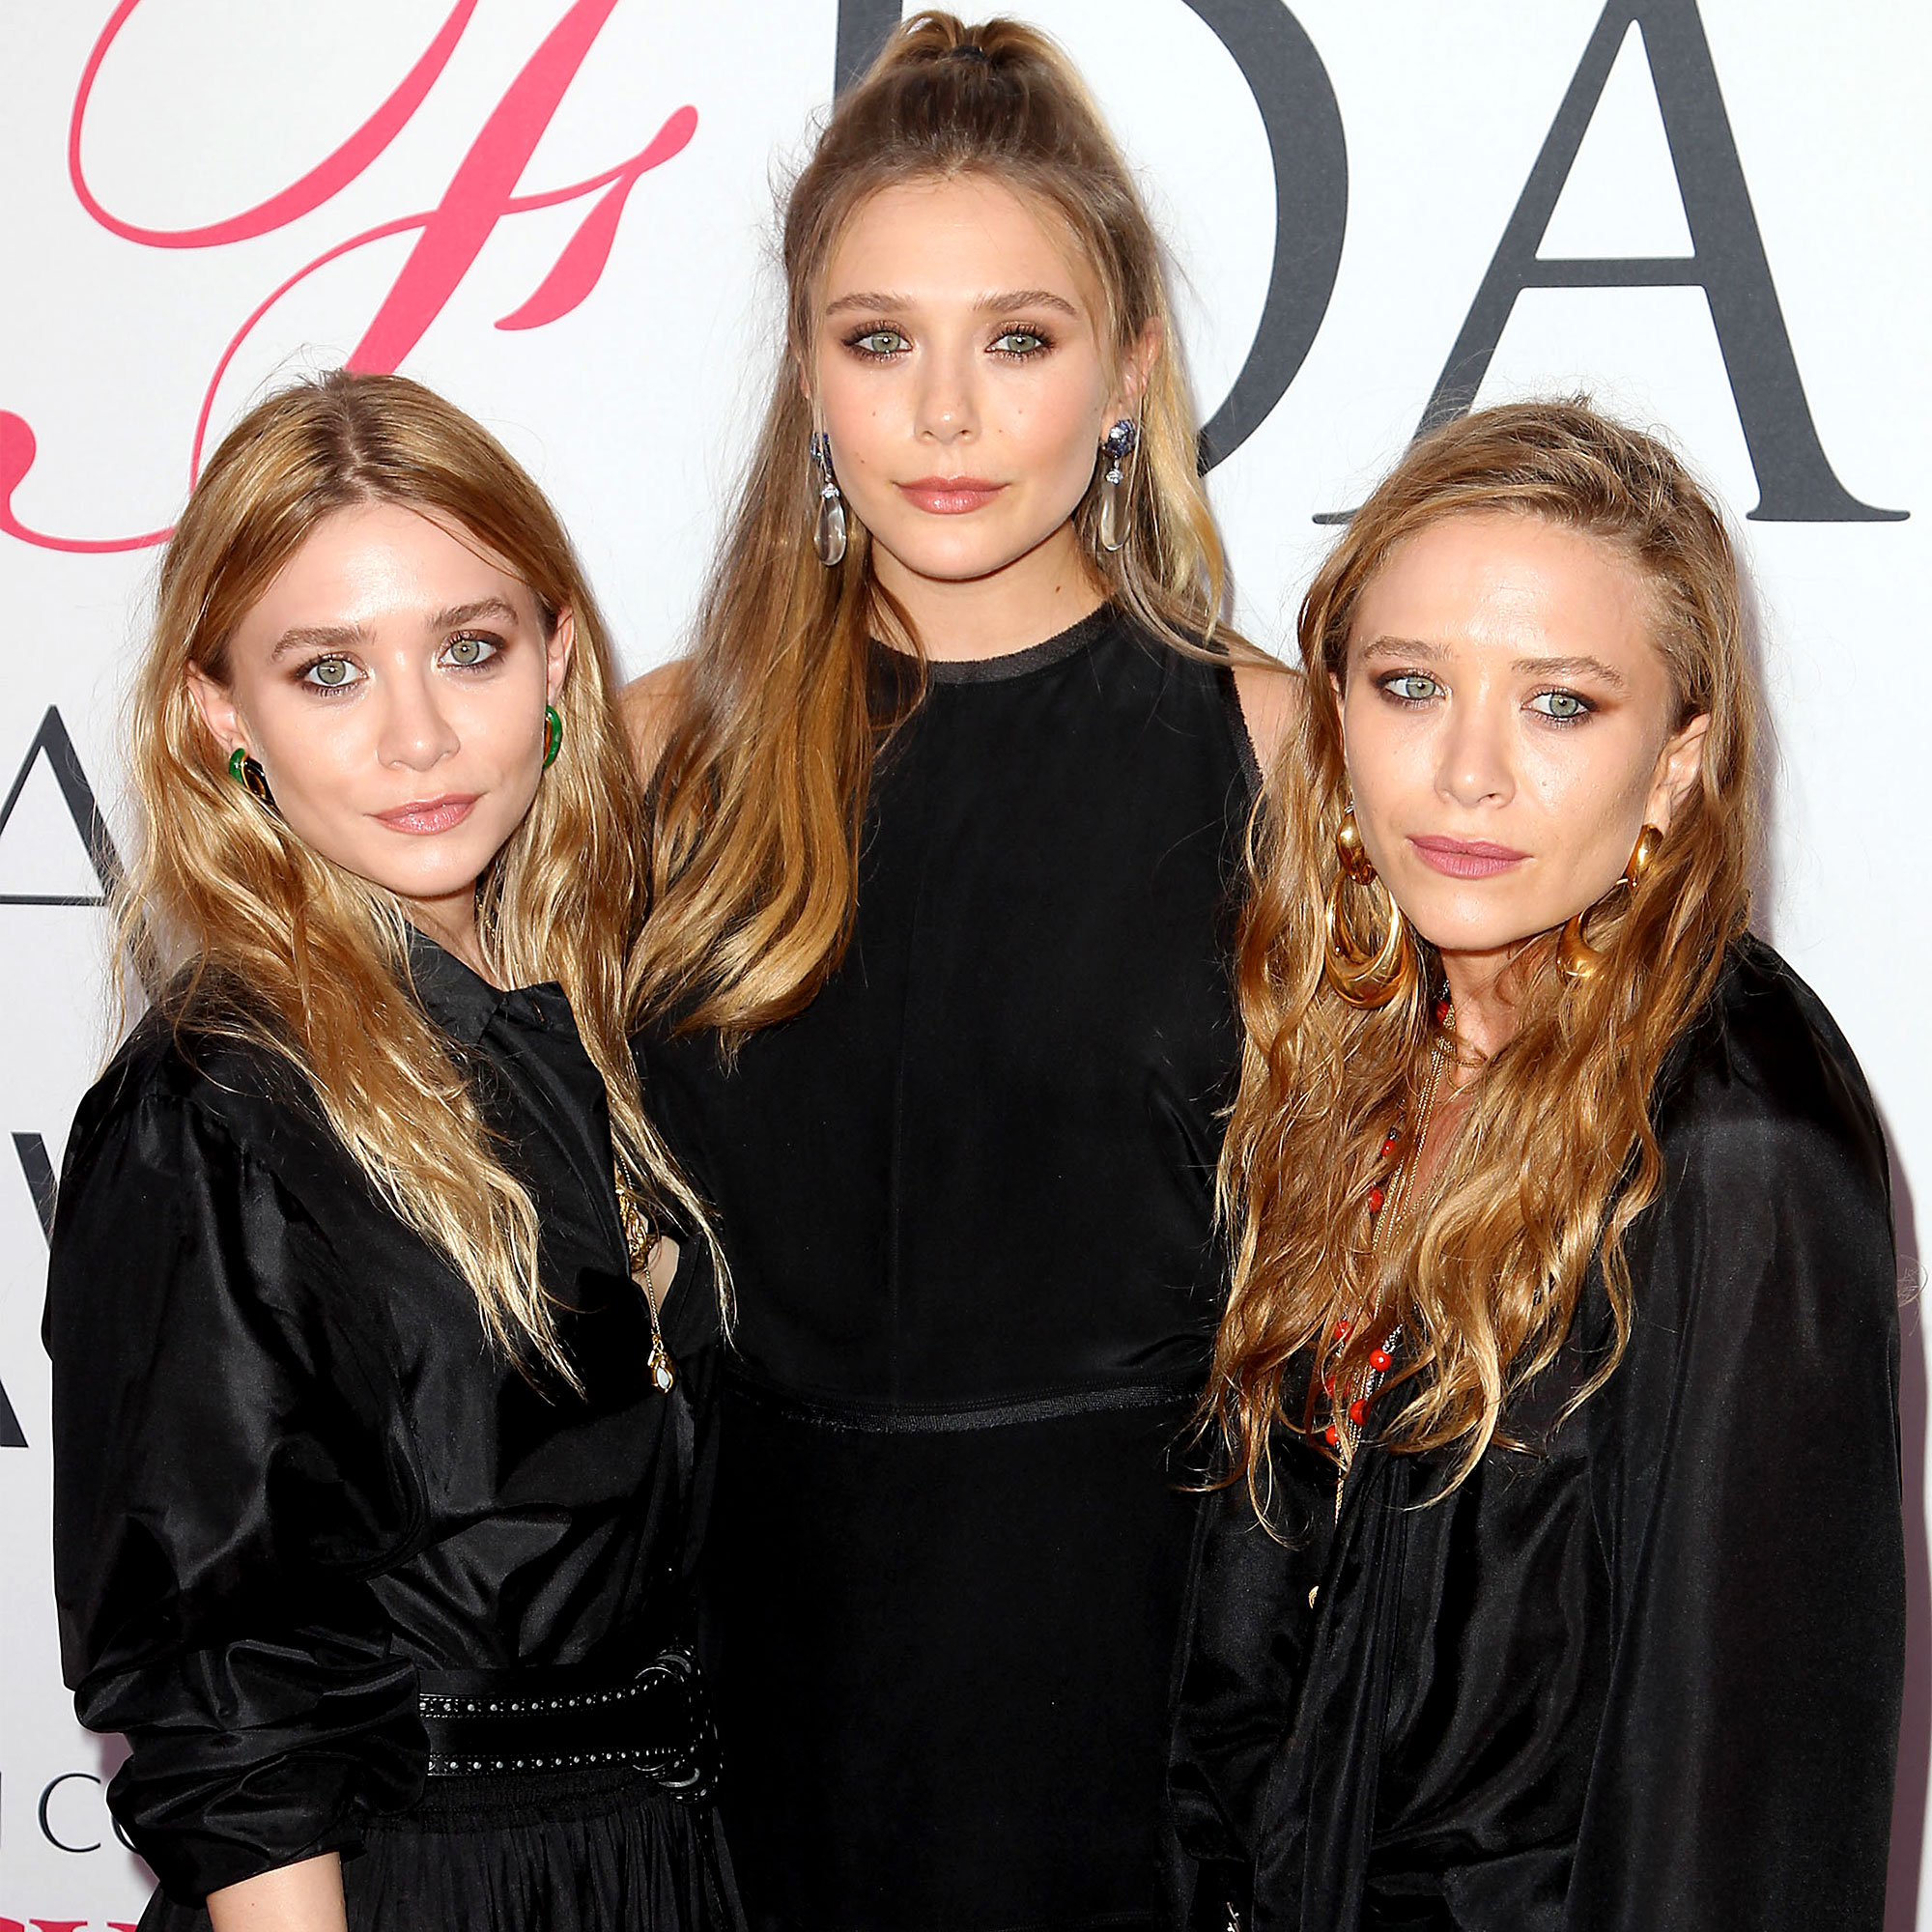 Mary-Kate and Ashley Olsen's The Row Has a Chic New London Store